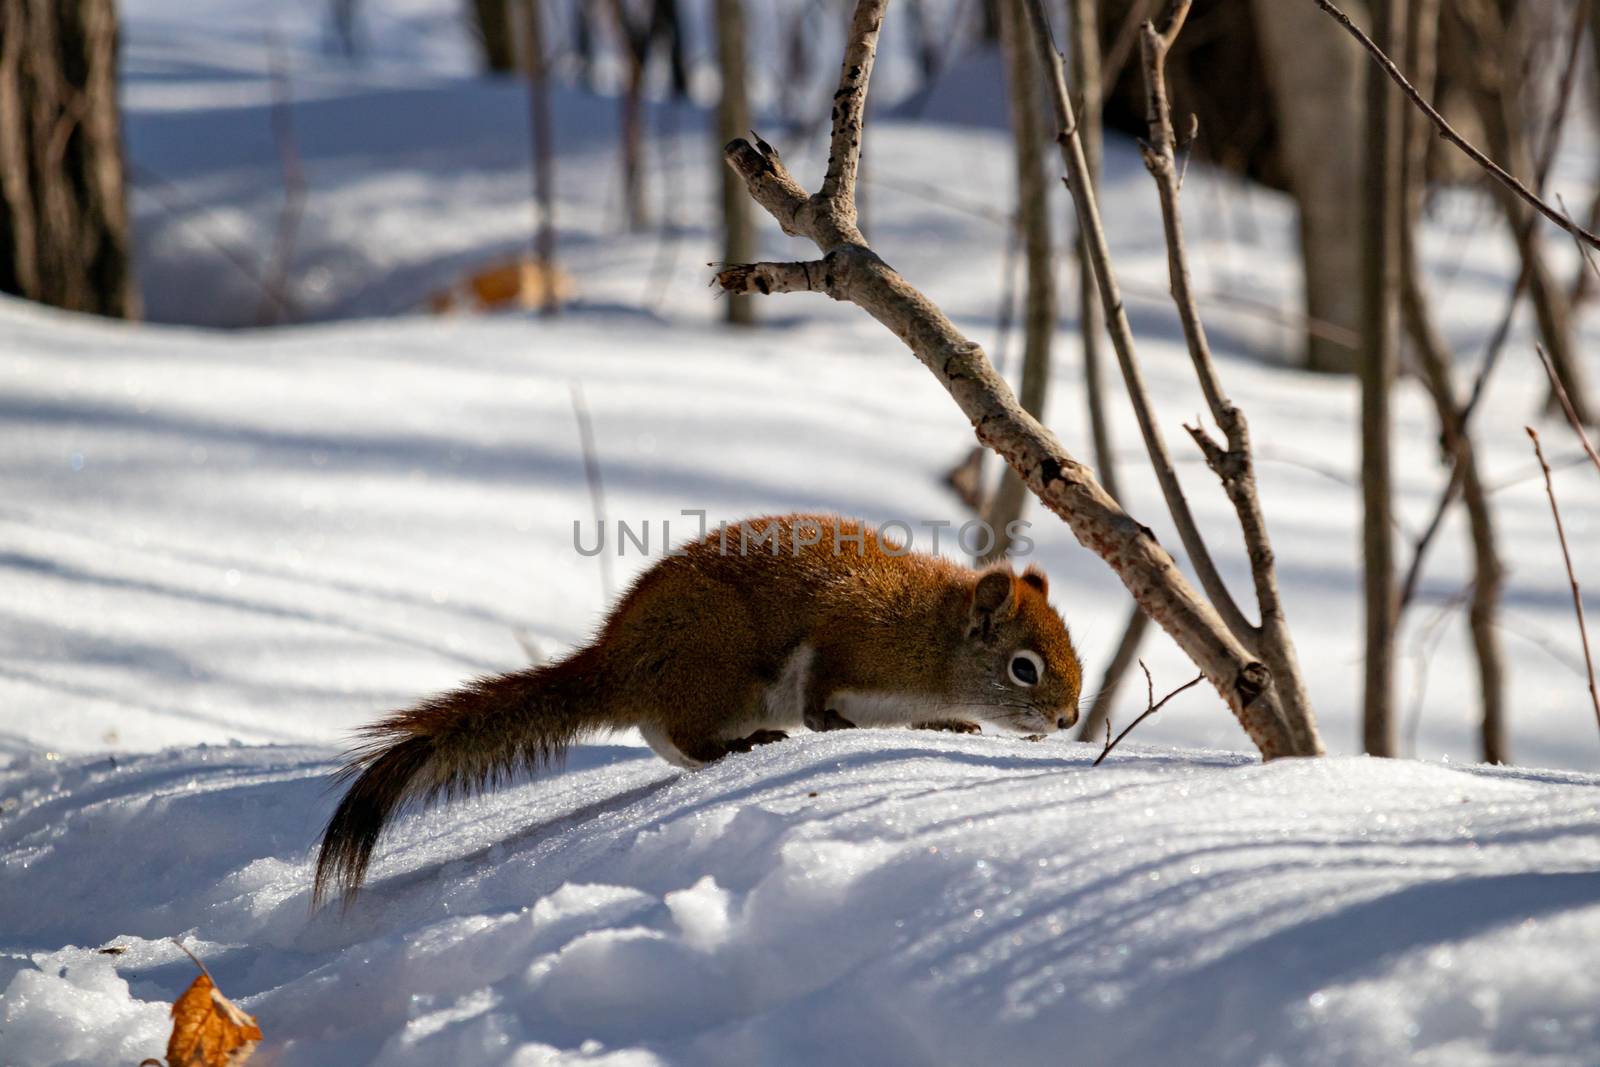 An American red squirrel in a Canadian forest is inspecting the snowy ground, looking for seeds along a nature trail that have been left behind by hikers.